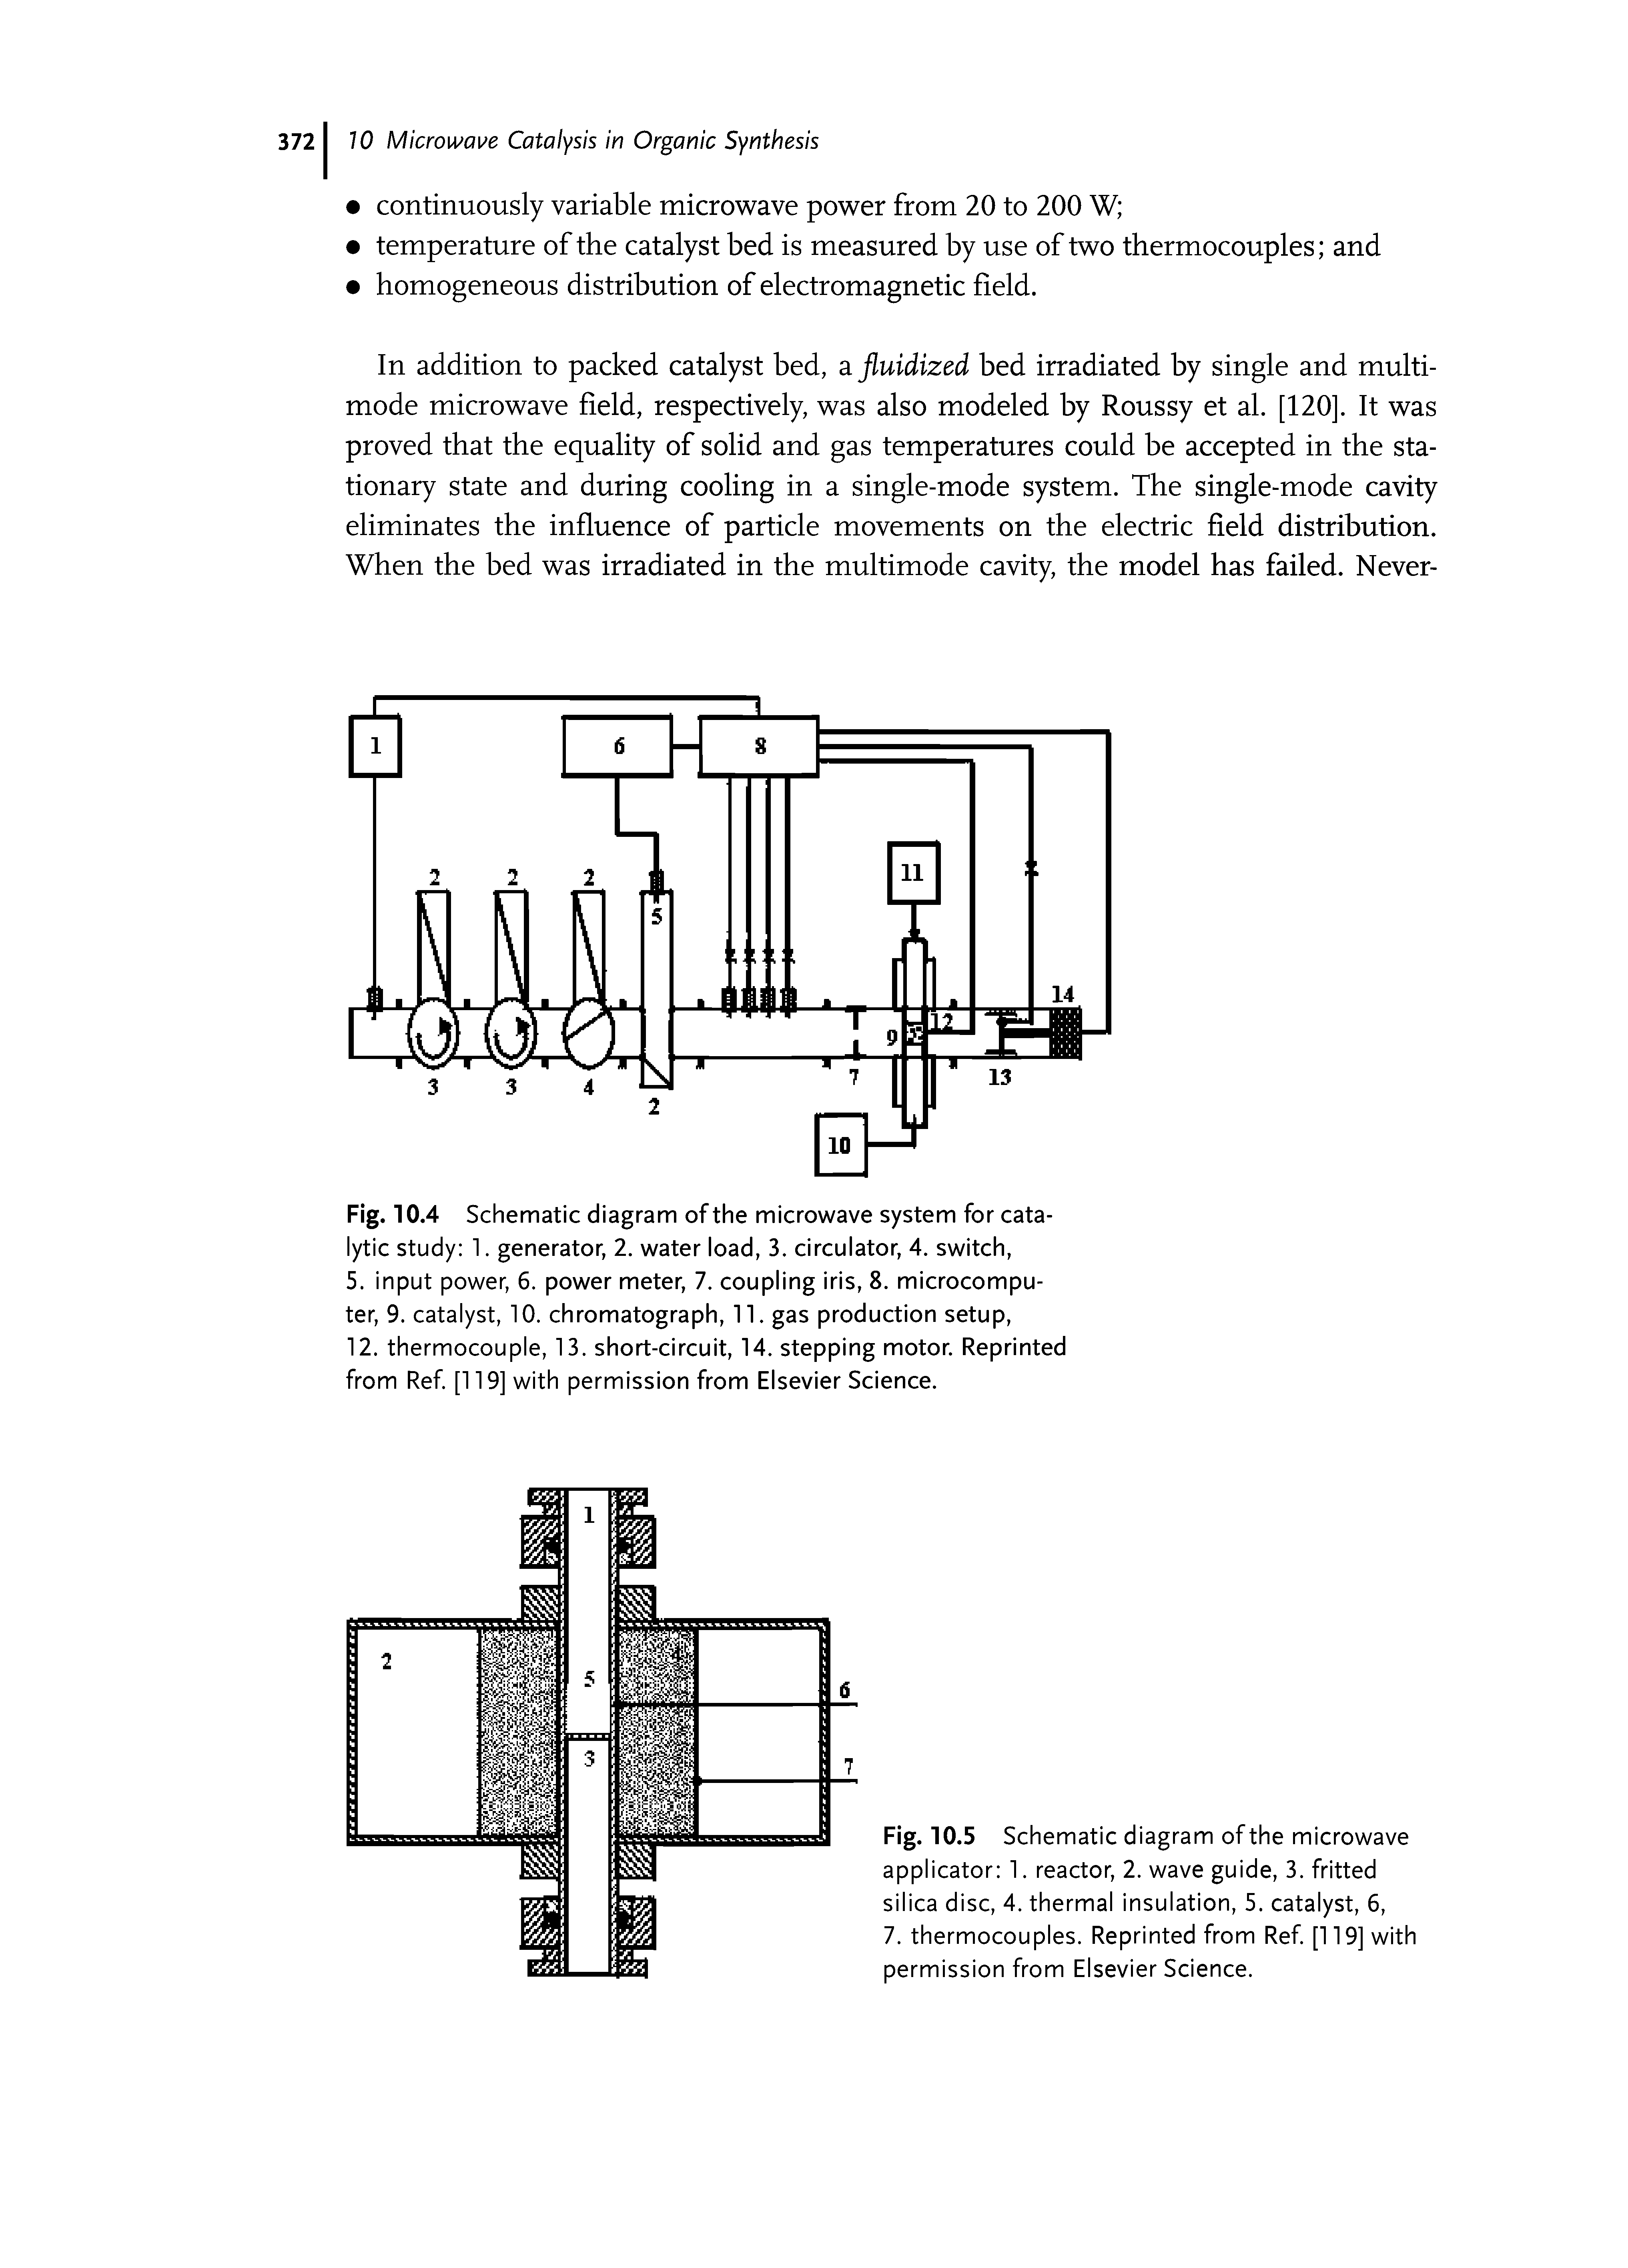 Fig. 10.5 Schematic diagram of the microwave applicator 1. reactor, 2. wave guide, 3. fritted silica disc, 4. thermal insulation, 5. catalyst, 6,...